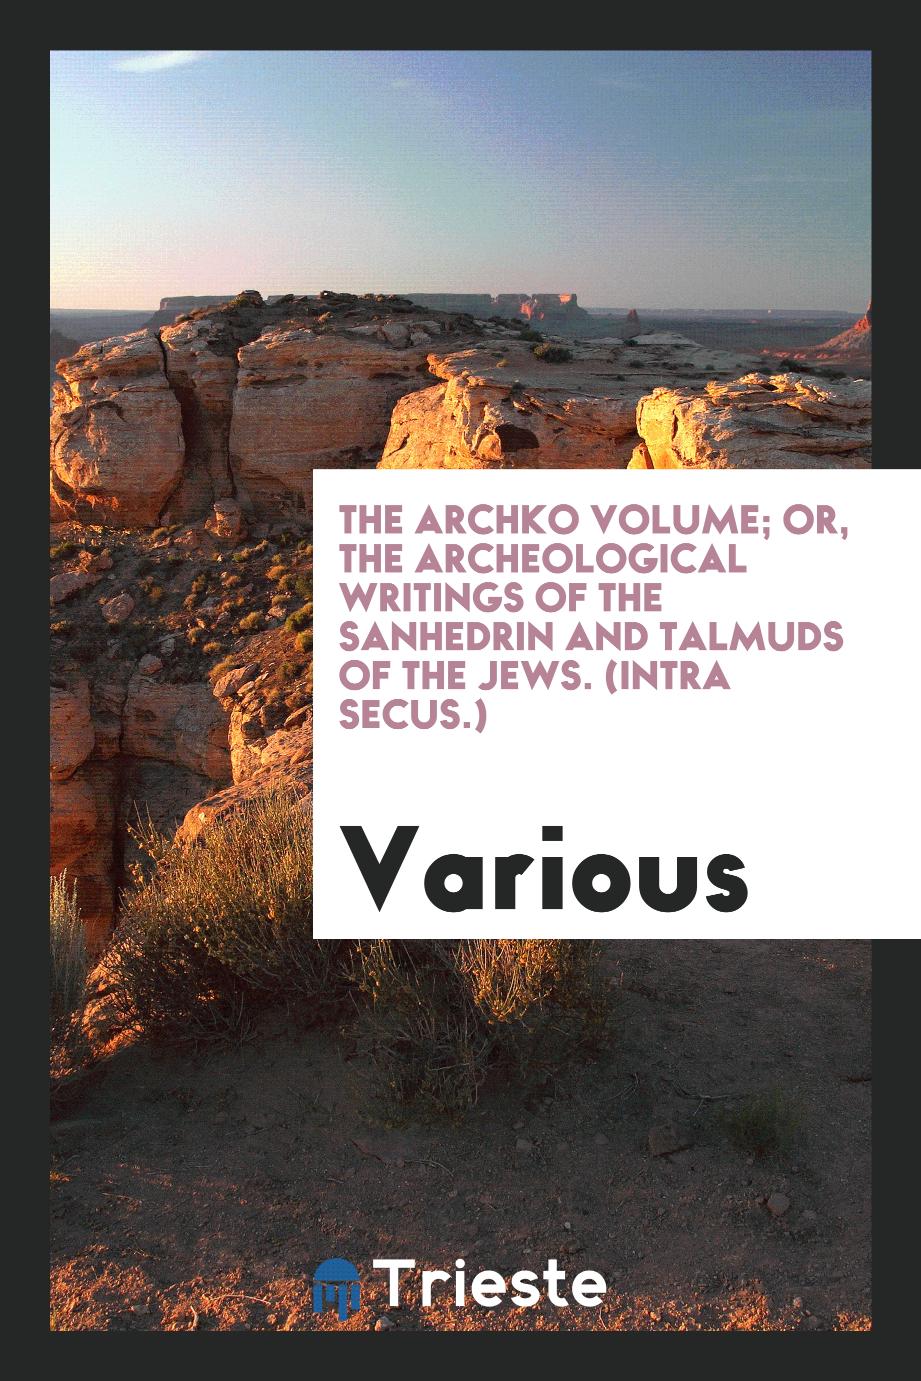 The archko volume; or, The archeological writings of the Sanhedrin and Talmuds of the Jews. (Intra secus.)